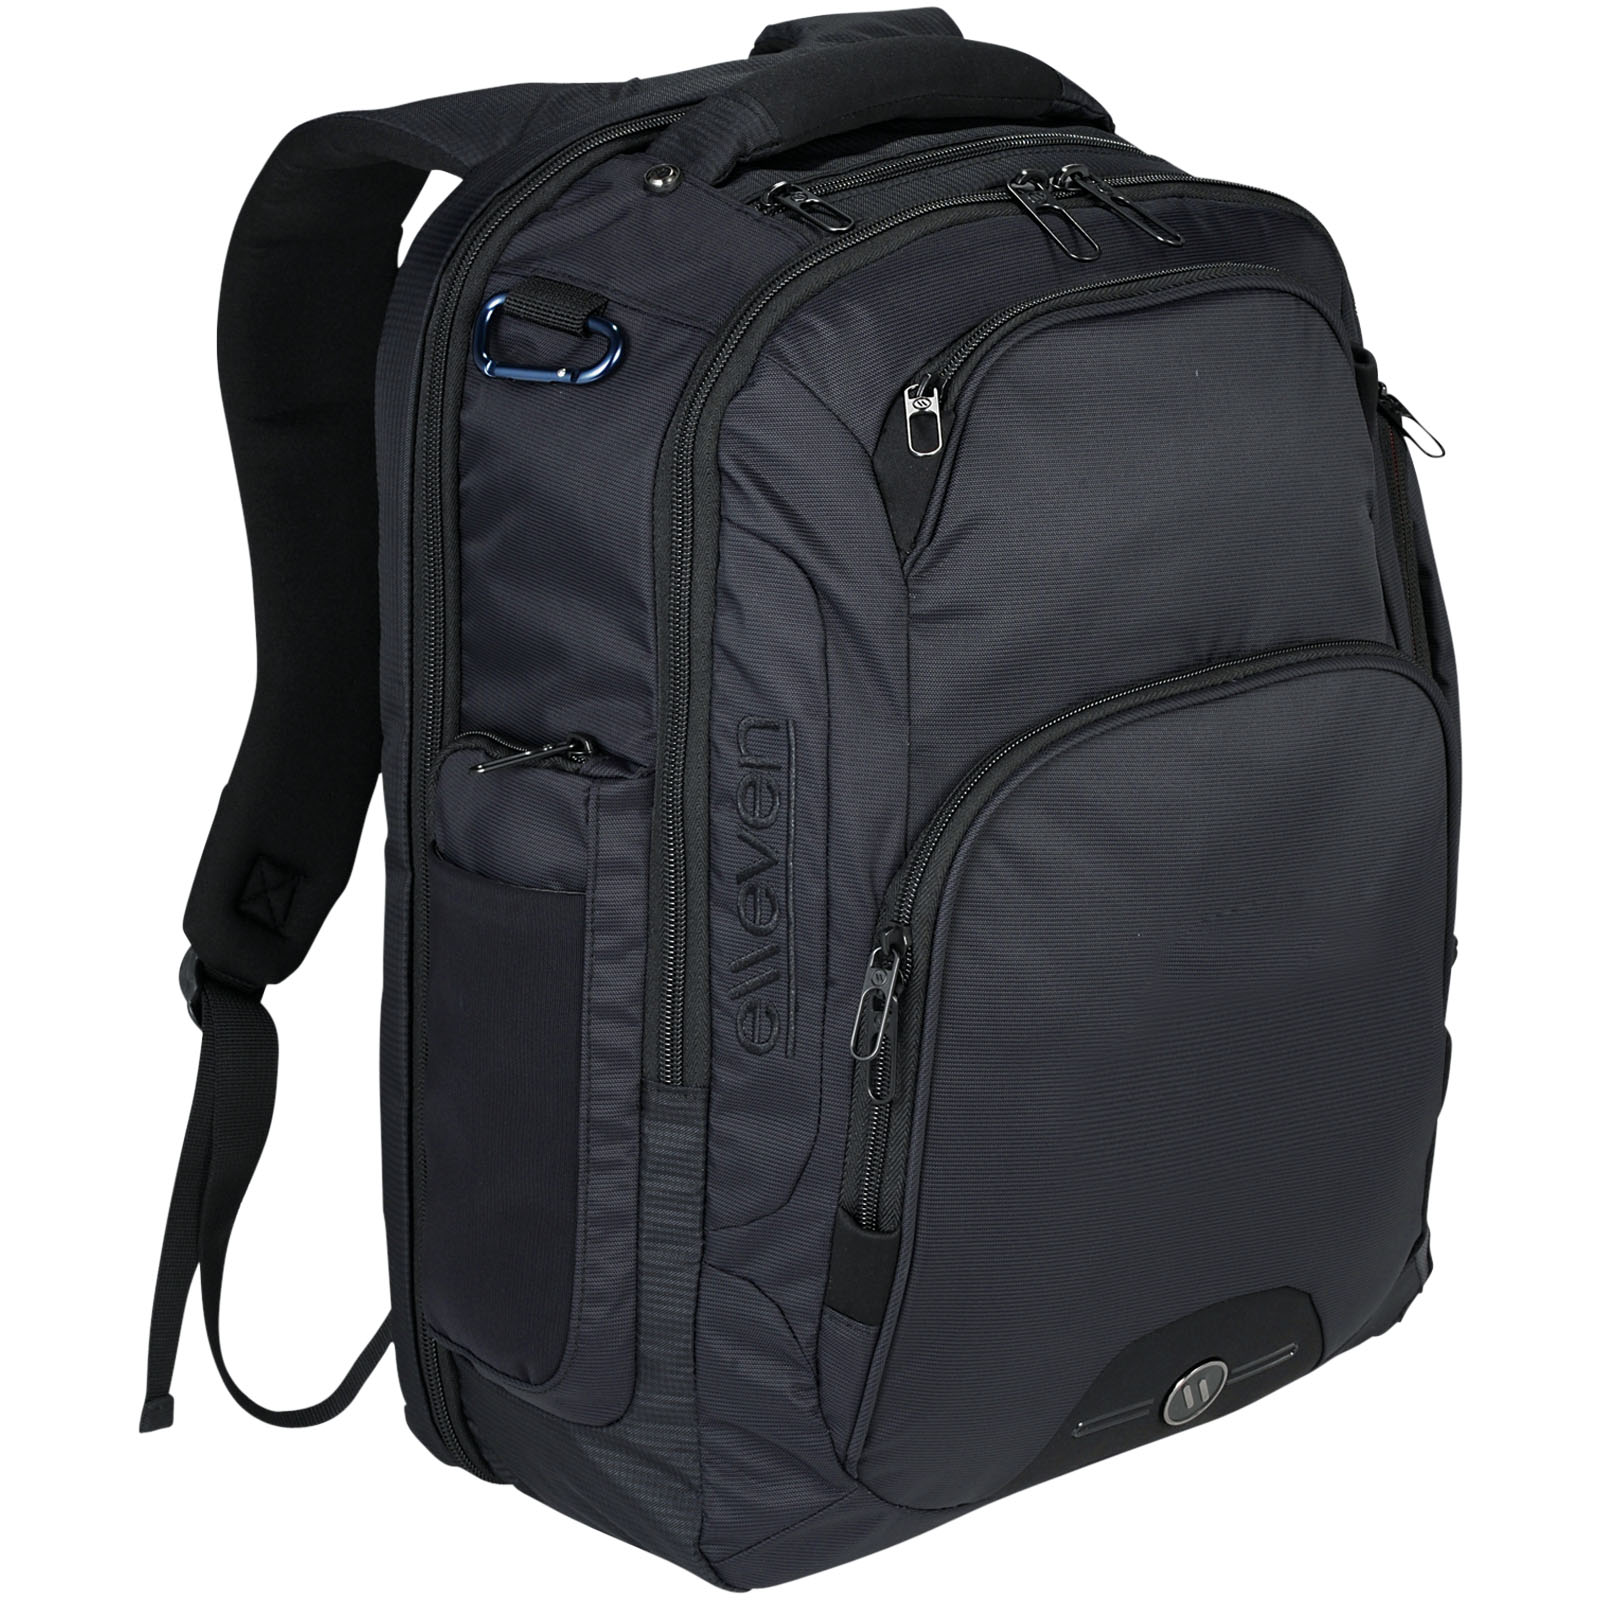 17” Laptop Backpack with Padded Compartment - Rothbury